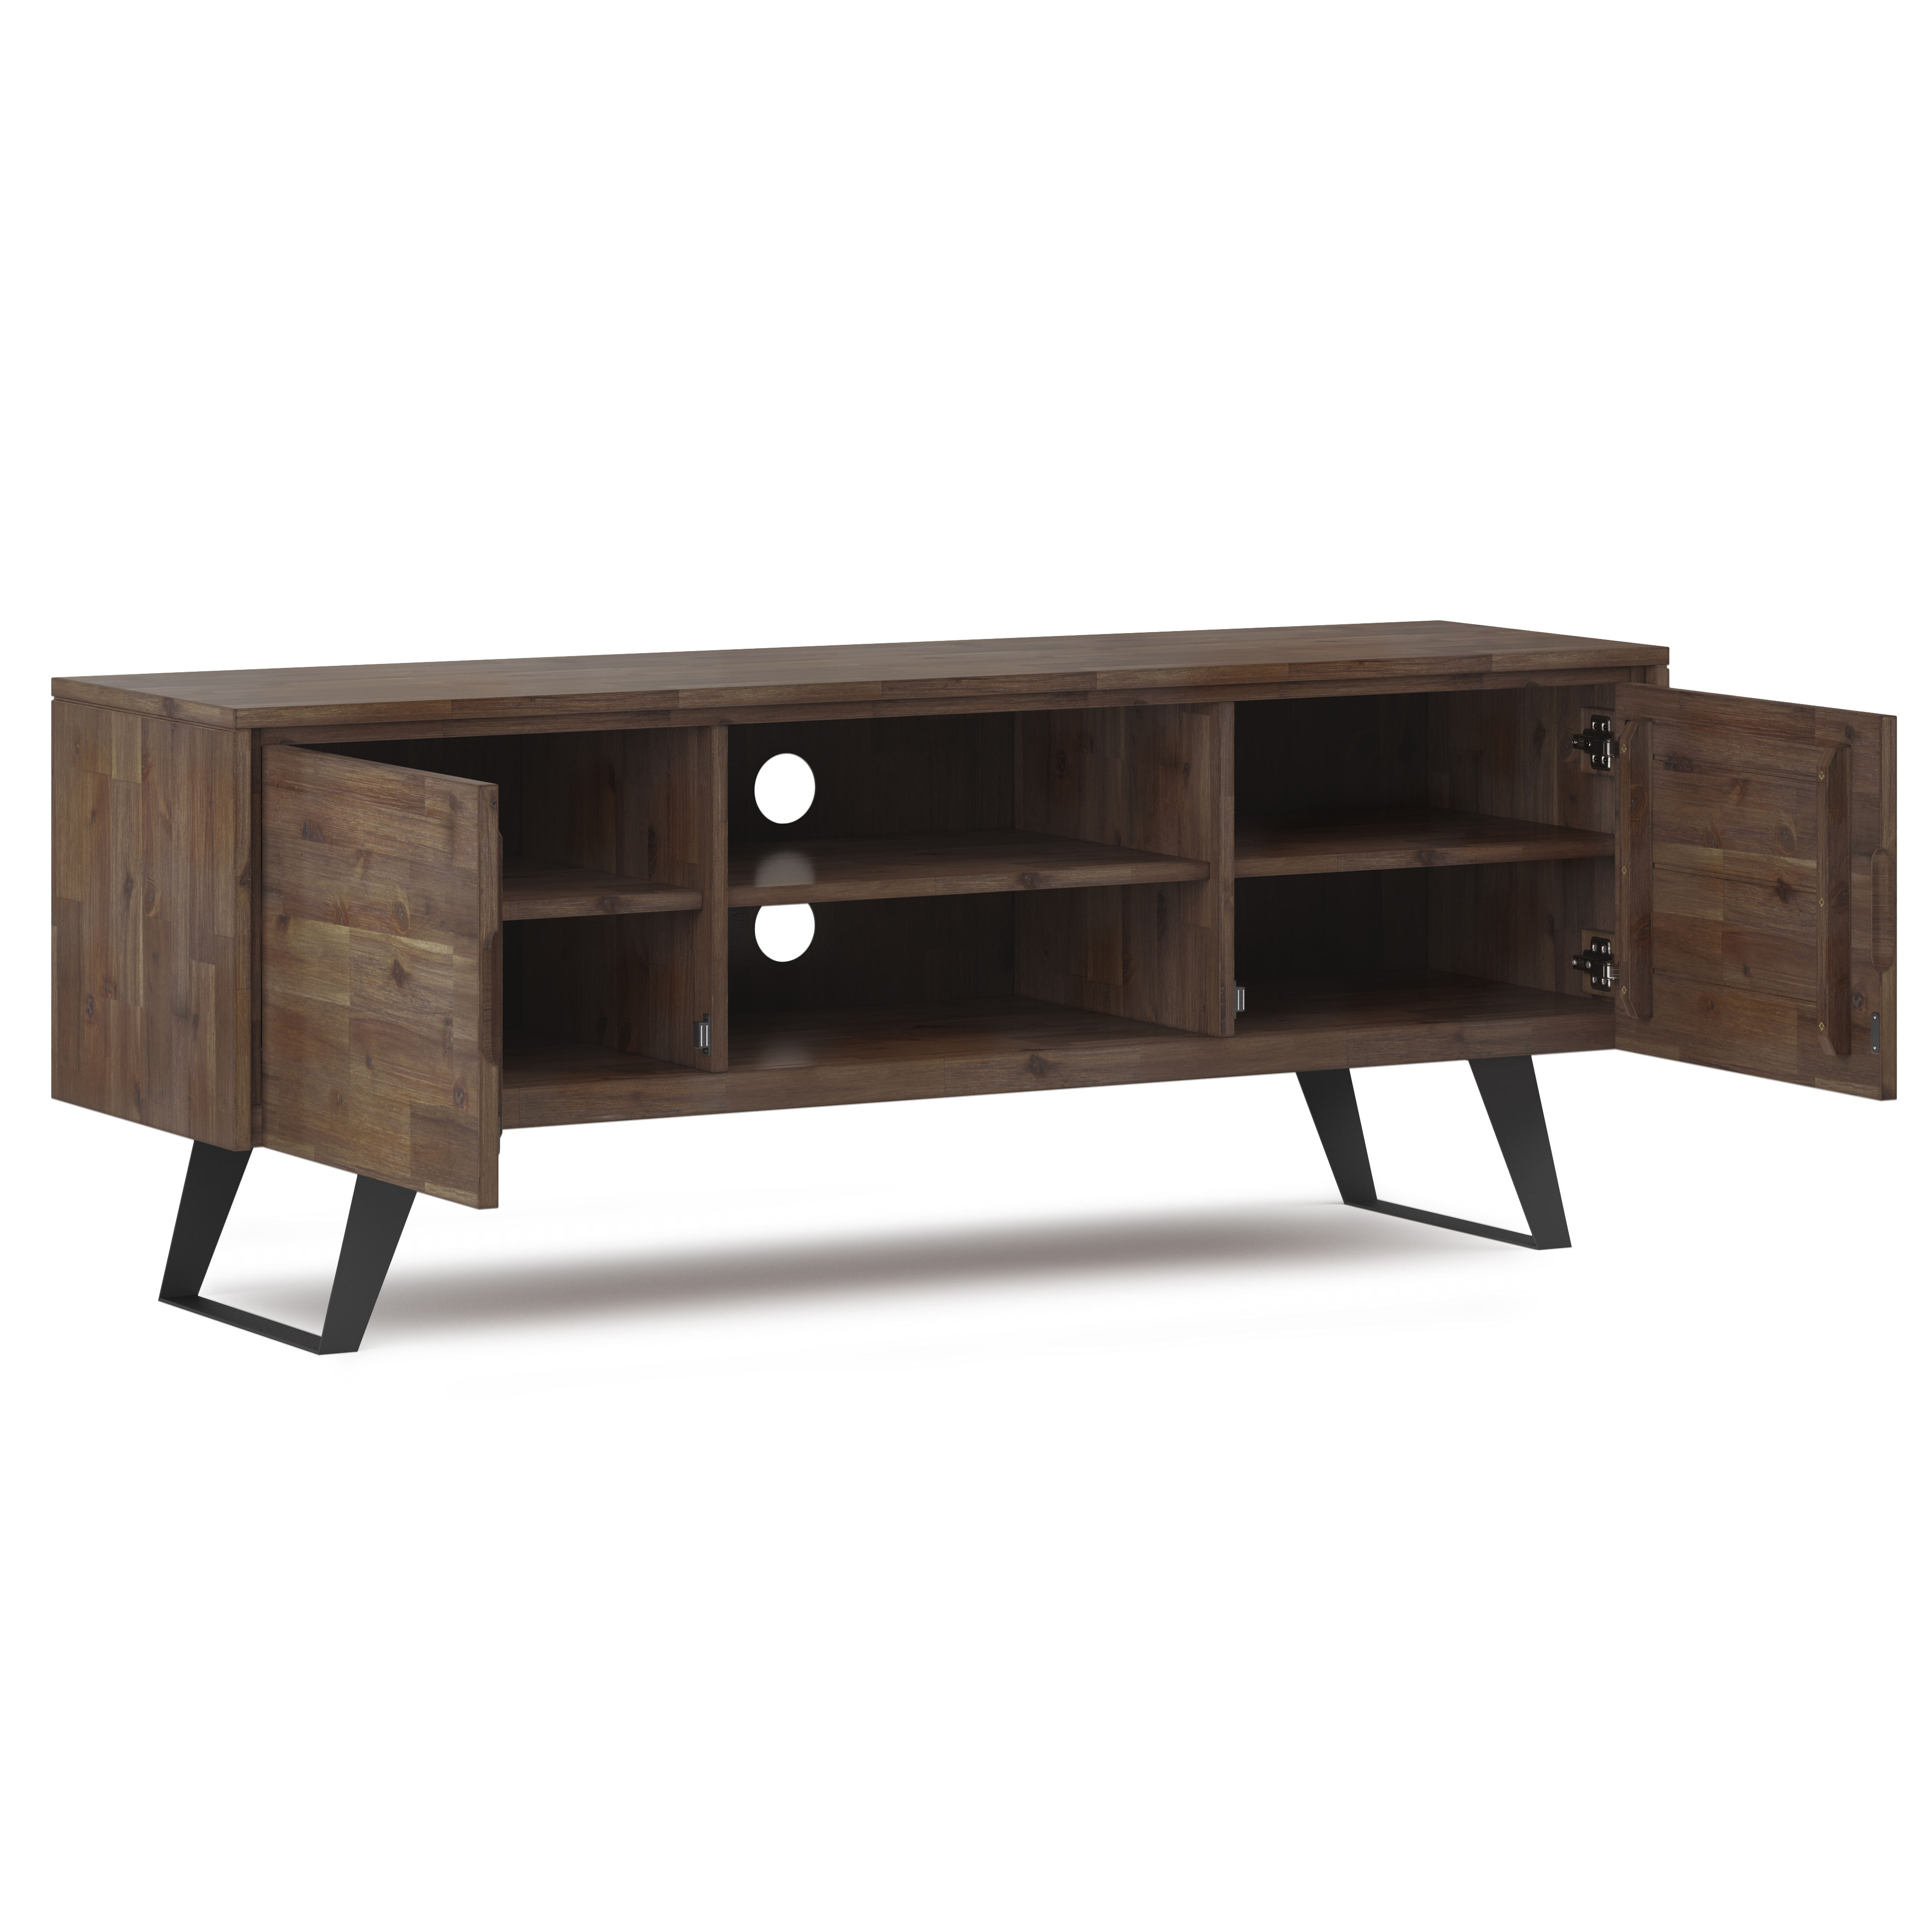 Simpli Home Lowry 63" Solid Wood Modern TV Stand in Rustic Aged Brown - image 2 of 13